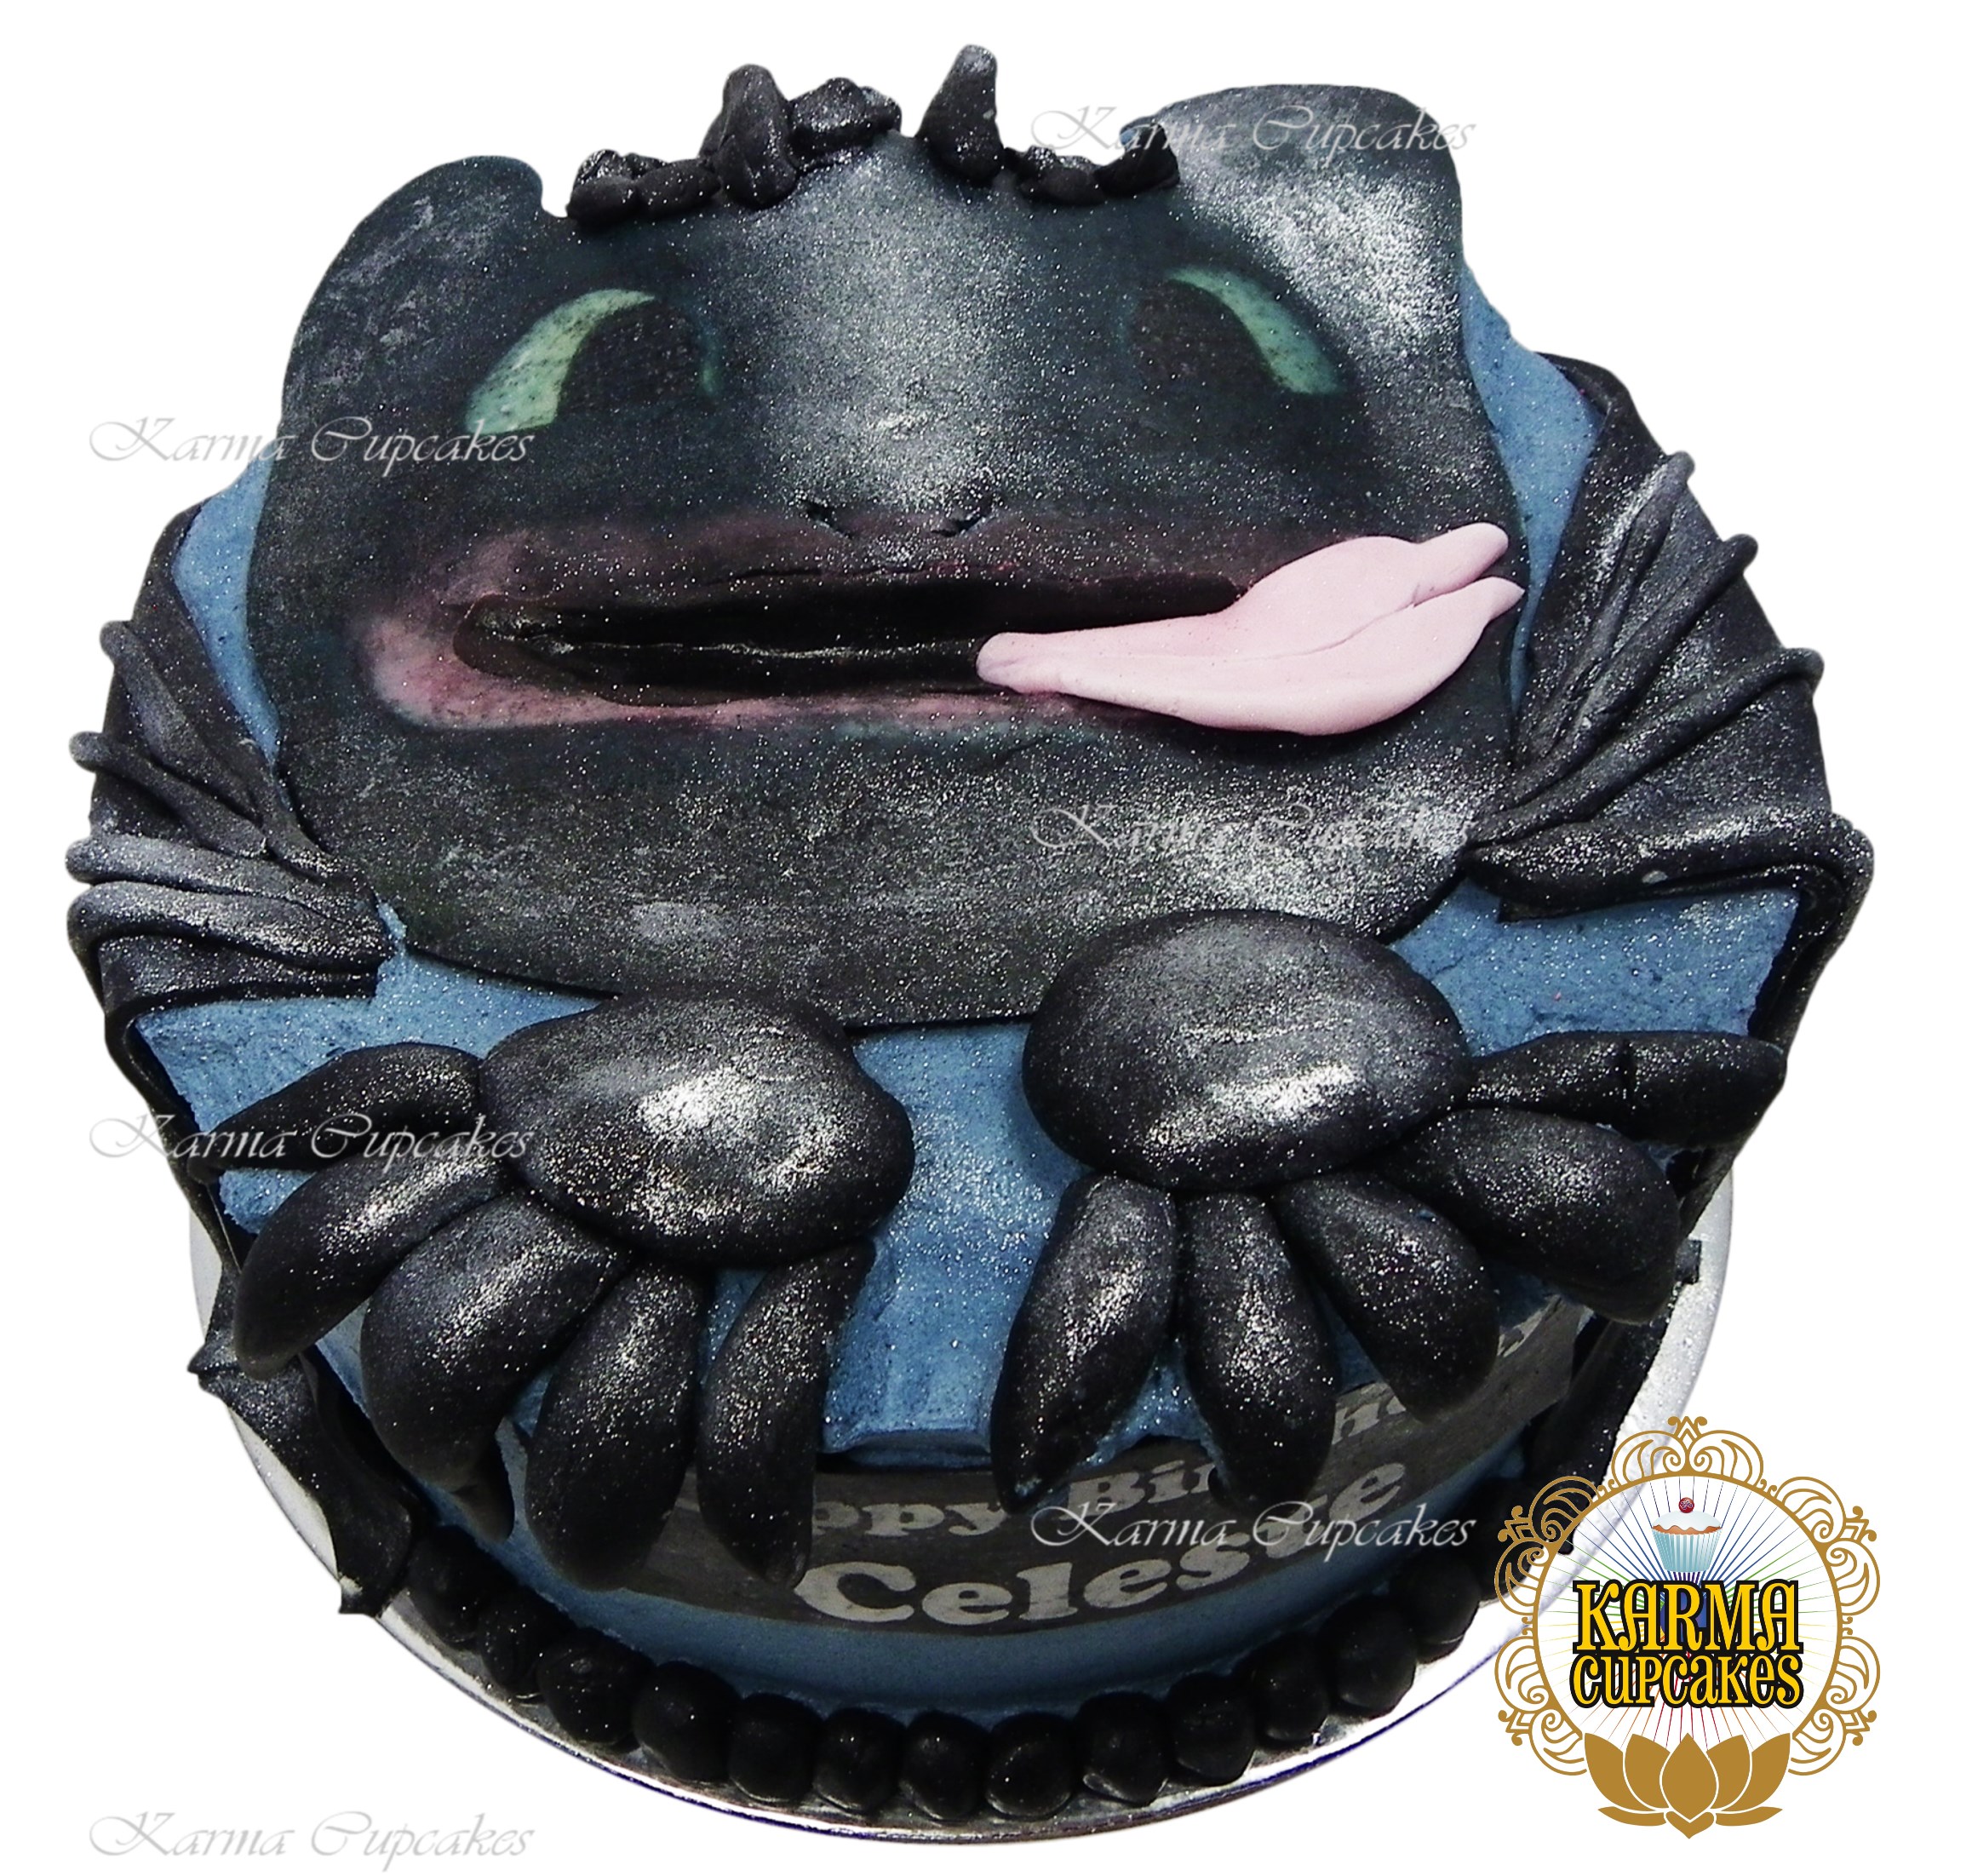 How to train your Dragon Cake